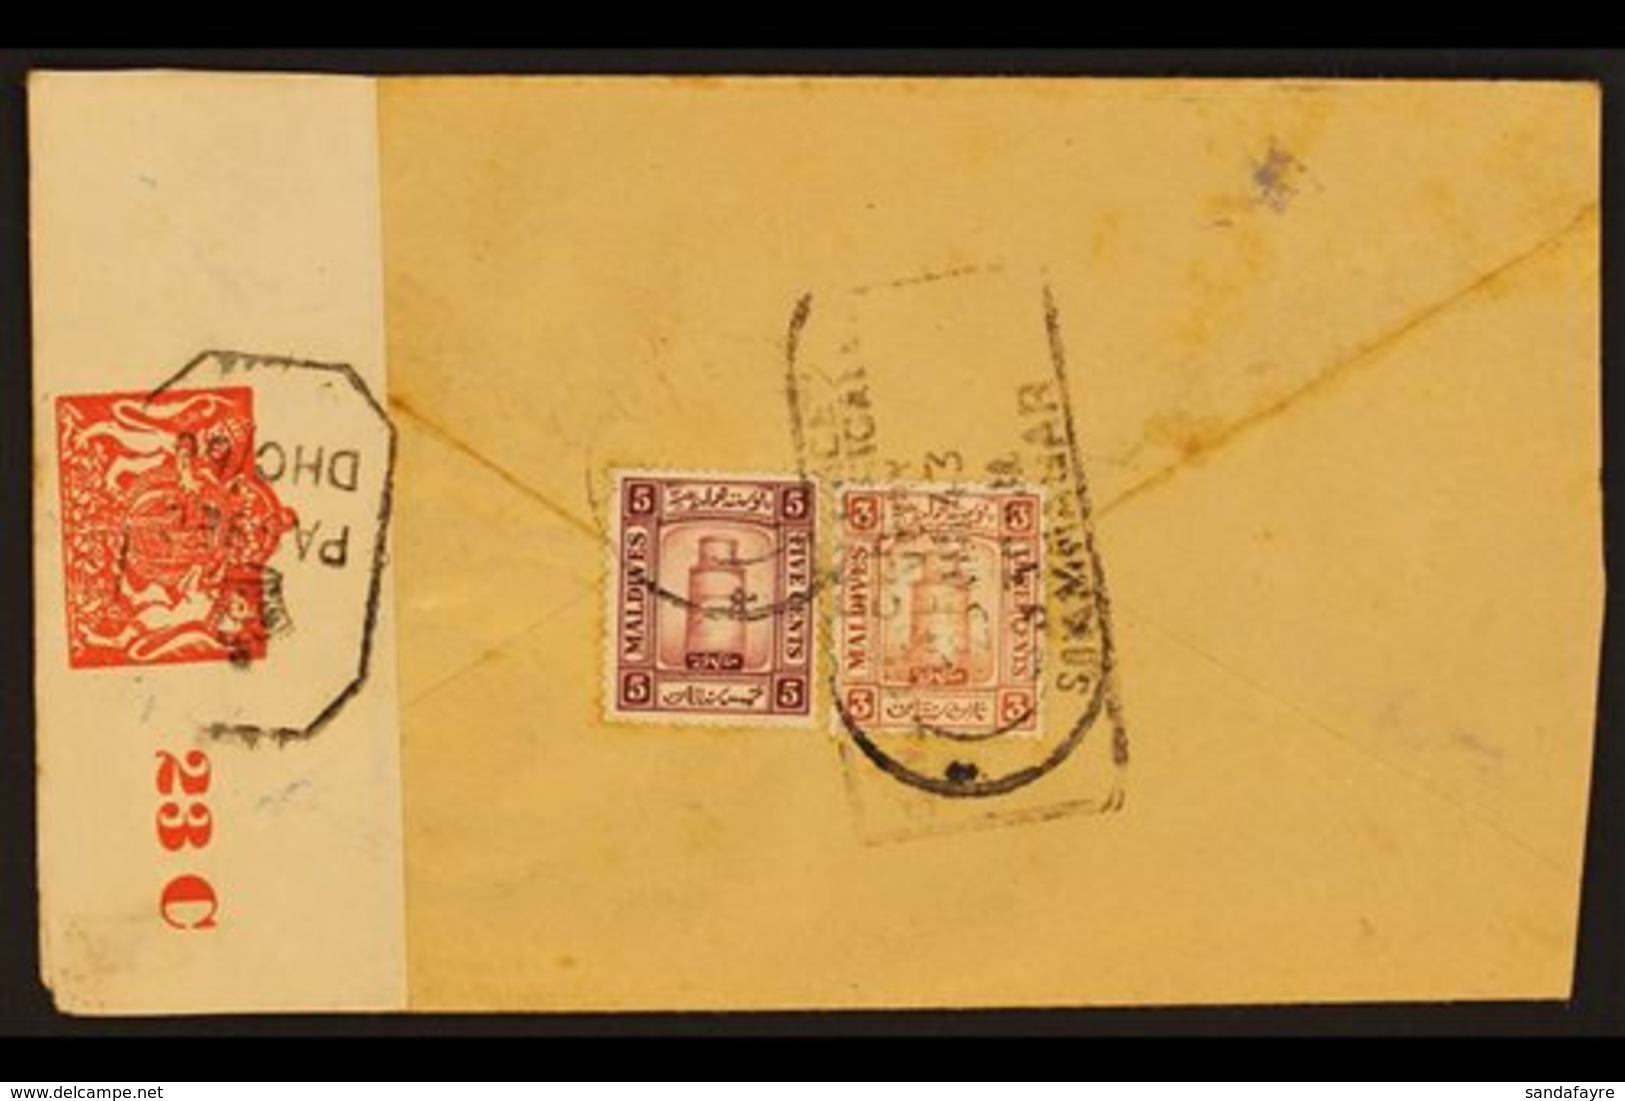 1943-5 CENSORED COVERS  3 Attractive Censored Covers Franked Minaret 3c Red Brown And 5c Purple With Censor Tape And Mar - Maldives (...-1965)